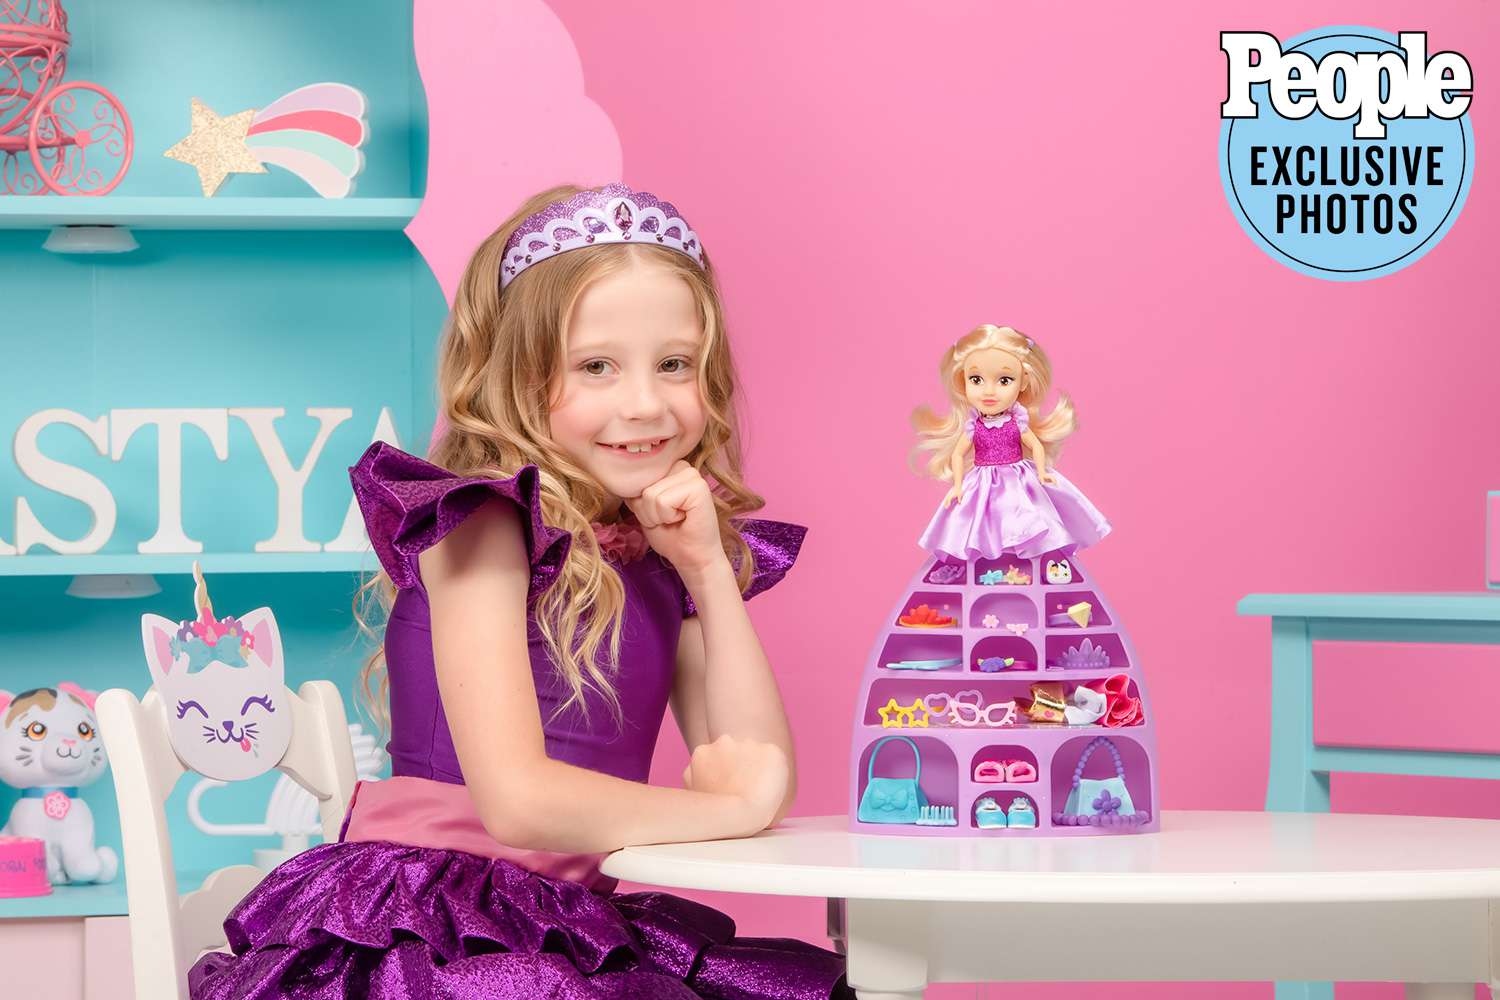 YouTube's Like Nastya, 7, Launches Toy Line and NFT Collection | PEOPLE.com